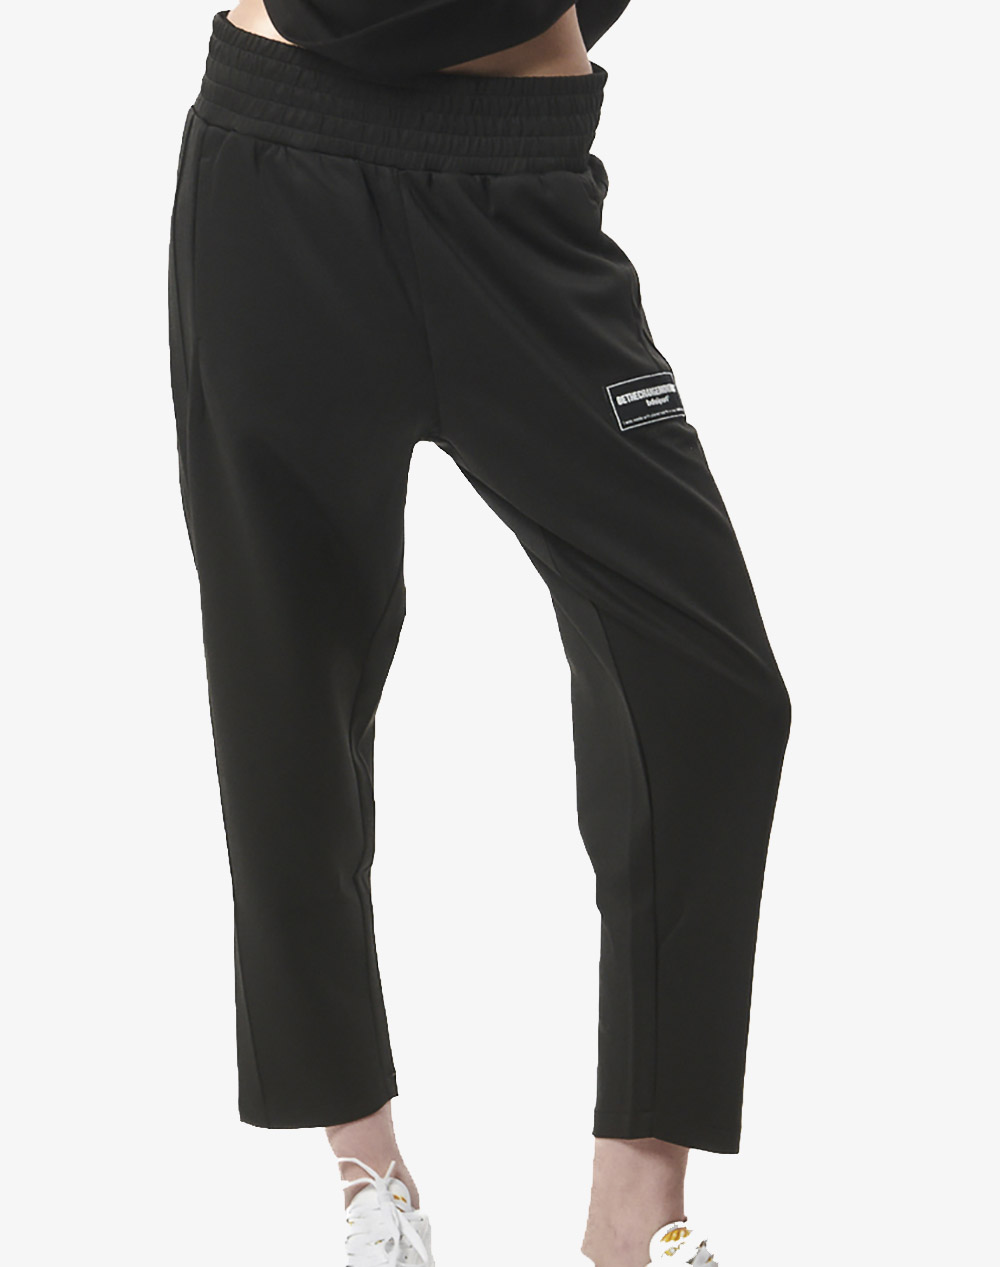 BODY ACTION WOMENS TECH FLEECE CROPPED TRACK PANTS